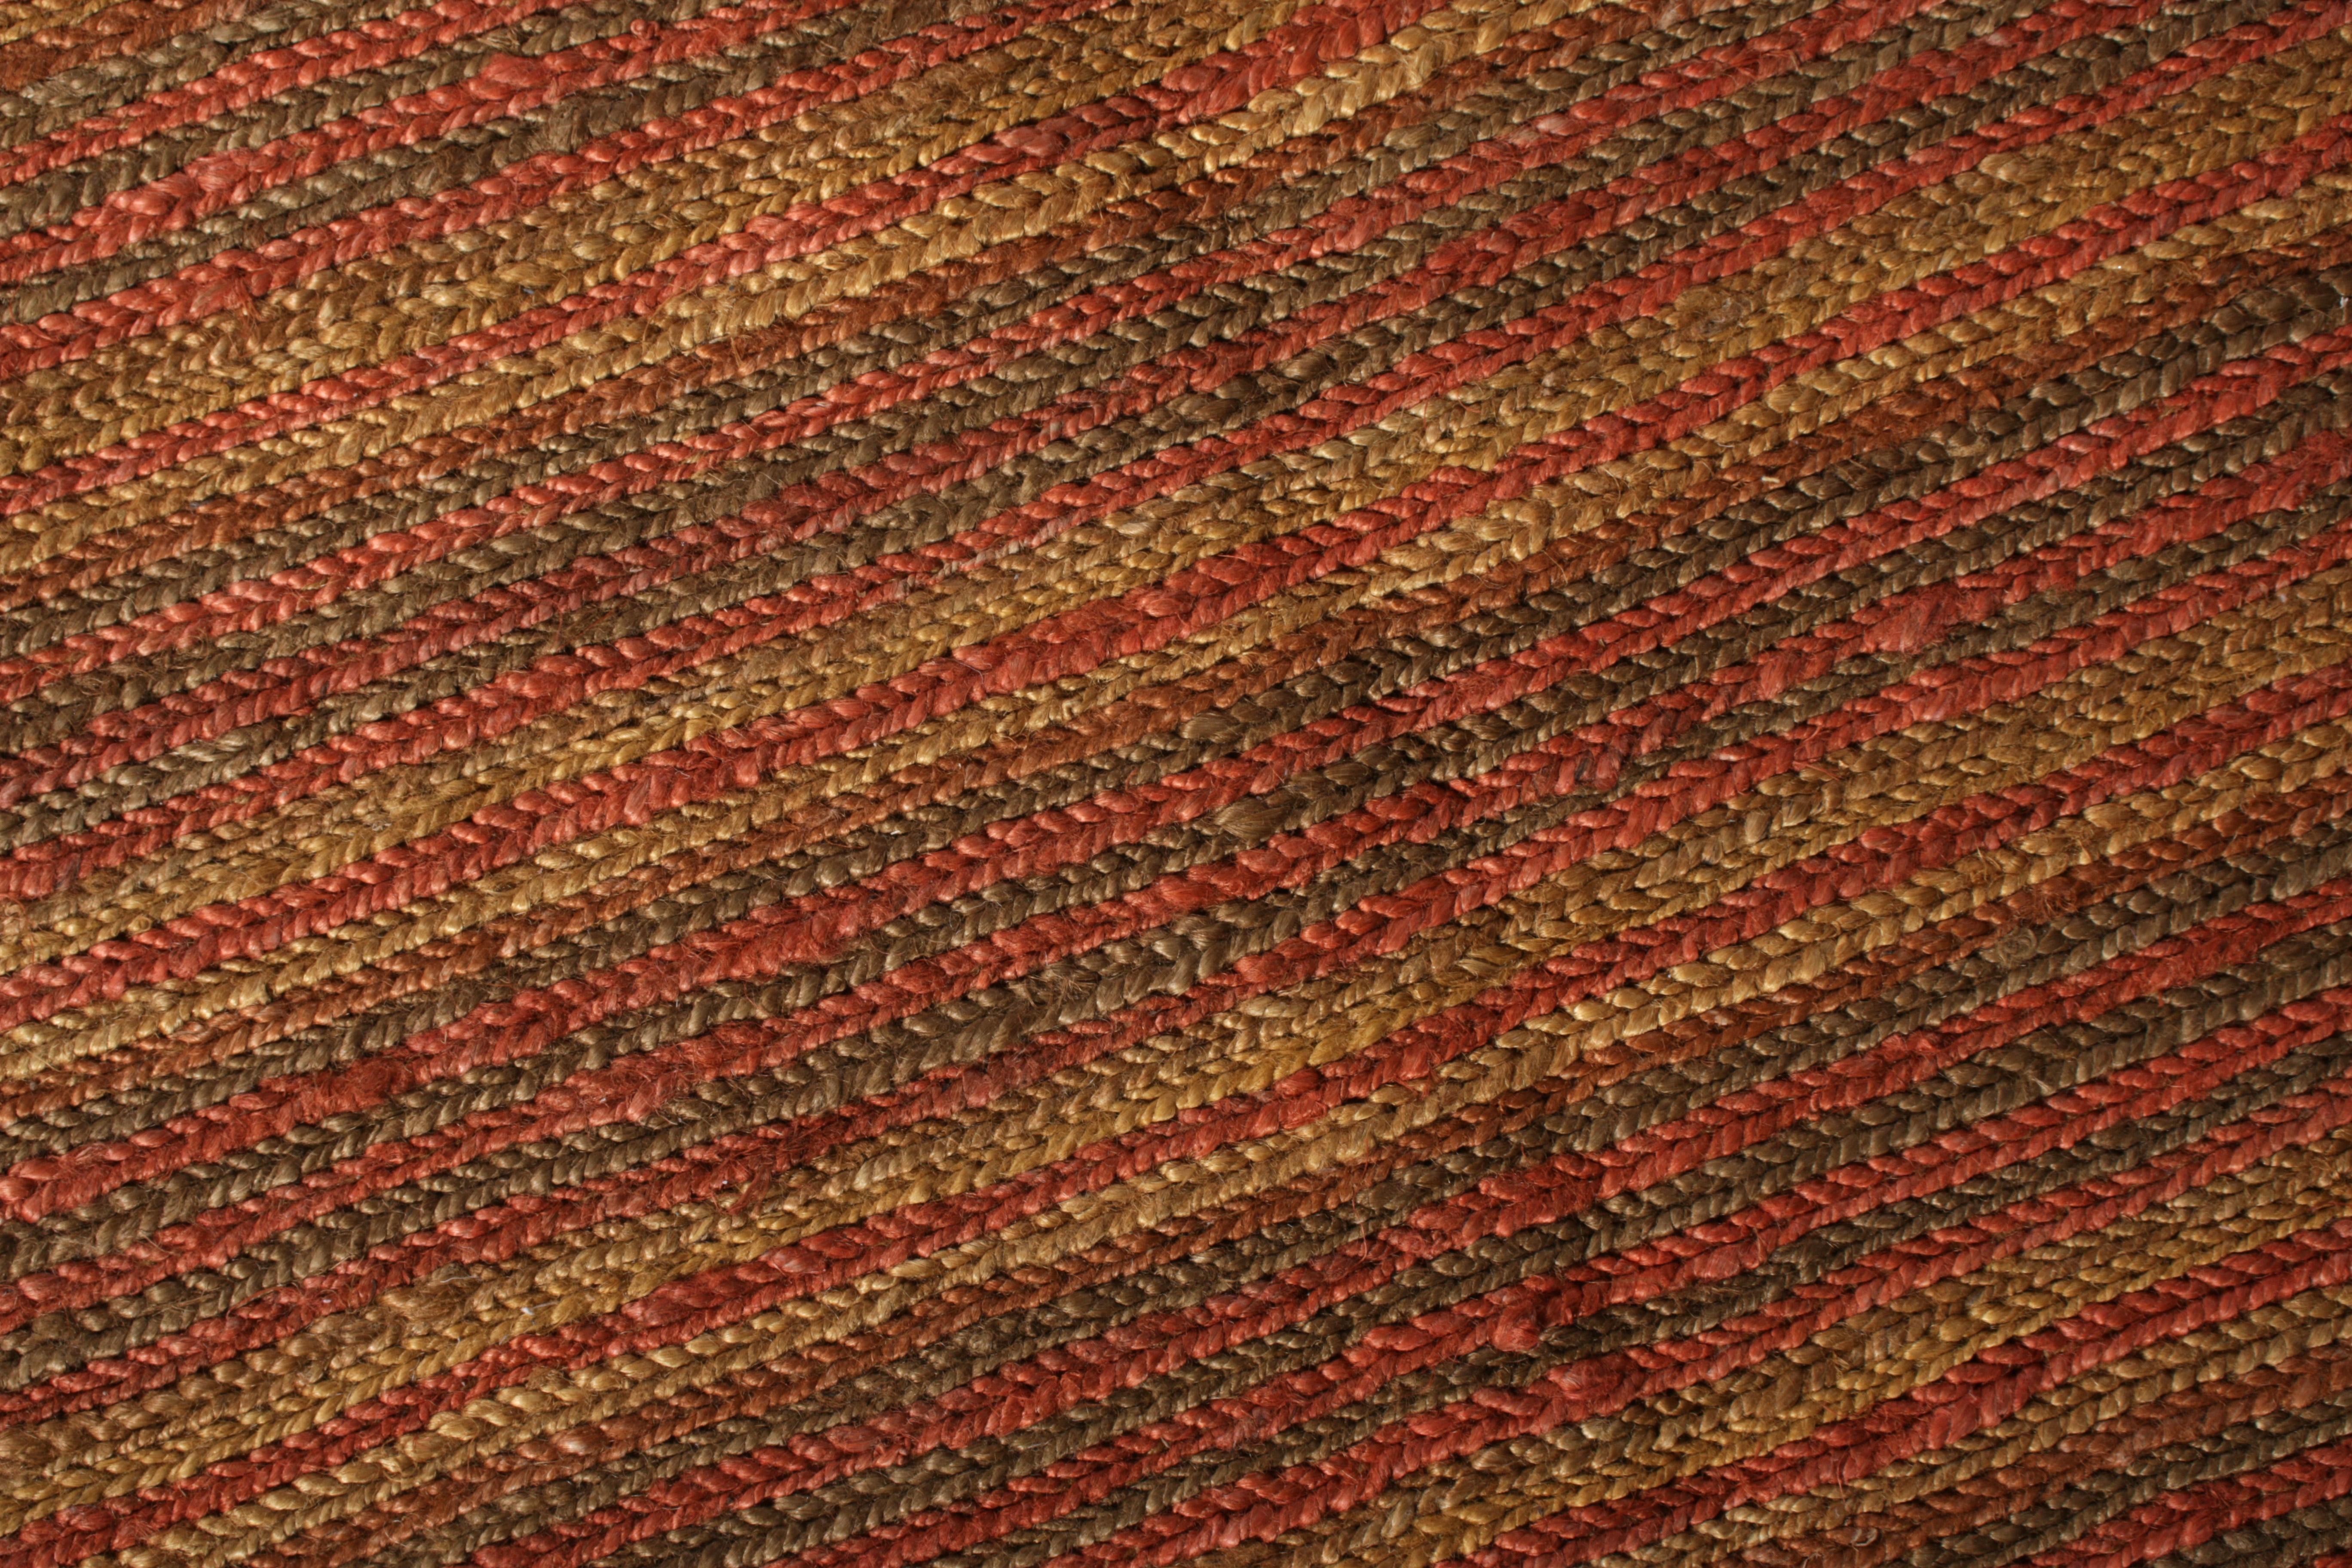 Hand-Woven Rug & Kilim's Contemporary Flat-Weave Striped Orange Brown Square For Sale